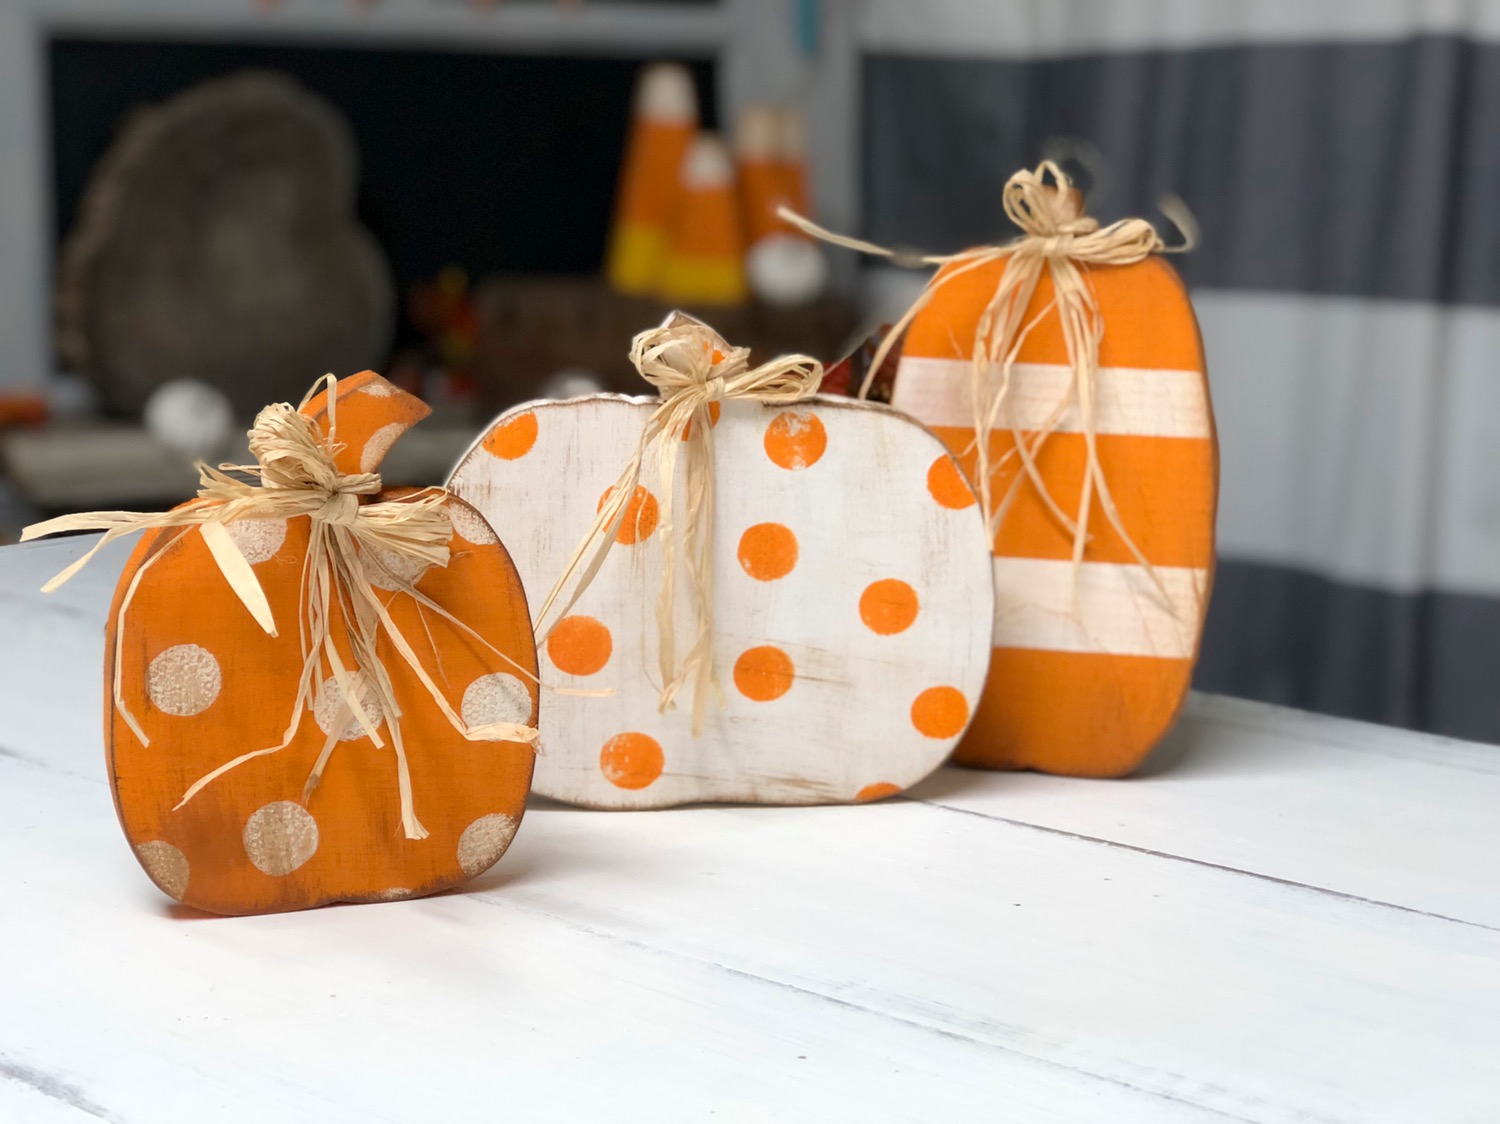 Easy scrap wood pumpkins using your Ryobi scroll saw. How to cut out pumpkin cutouts for your fall decor using your scroll saw.